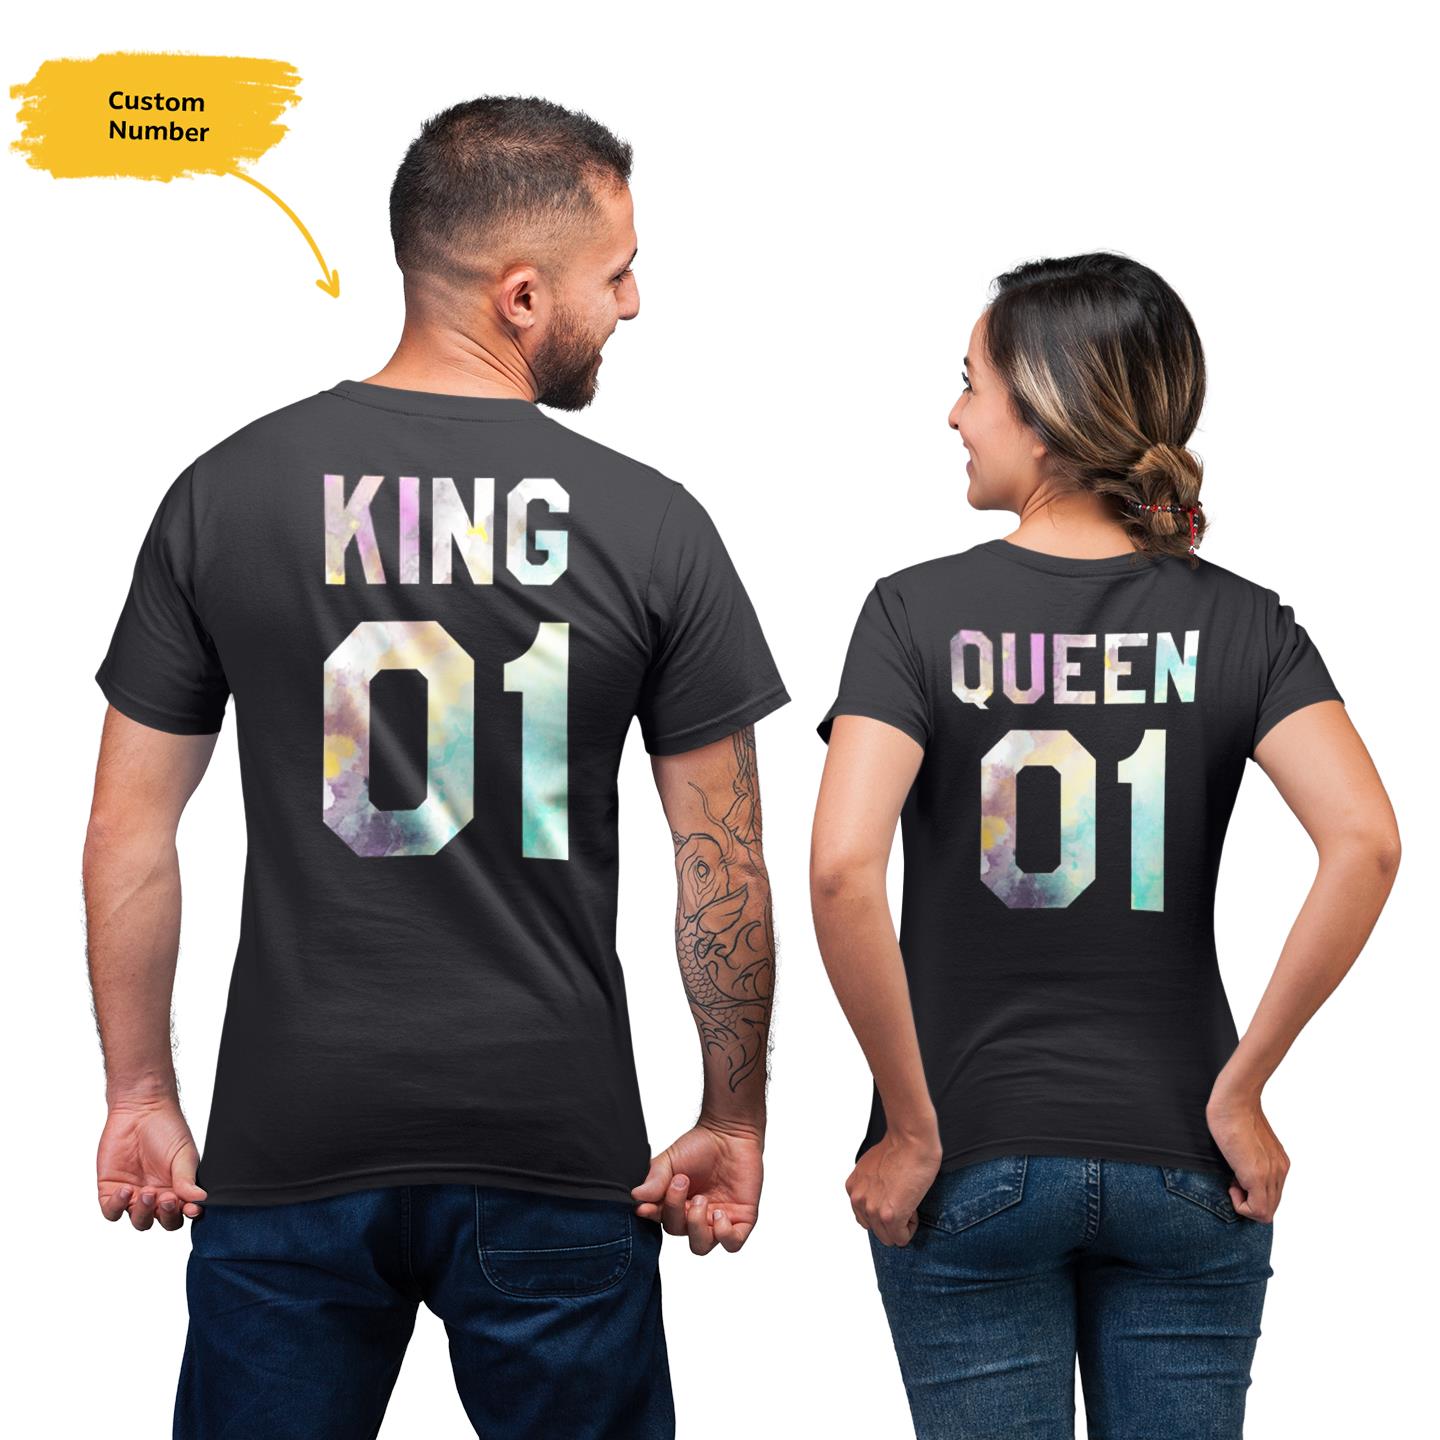 Personalized King Queen Watercolors T-Shirts Custom Number For Lover Couple Matching